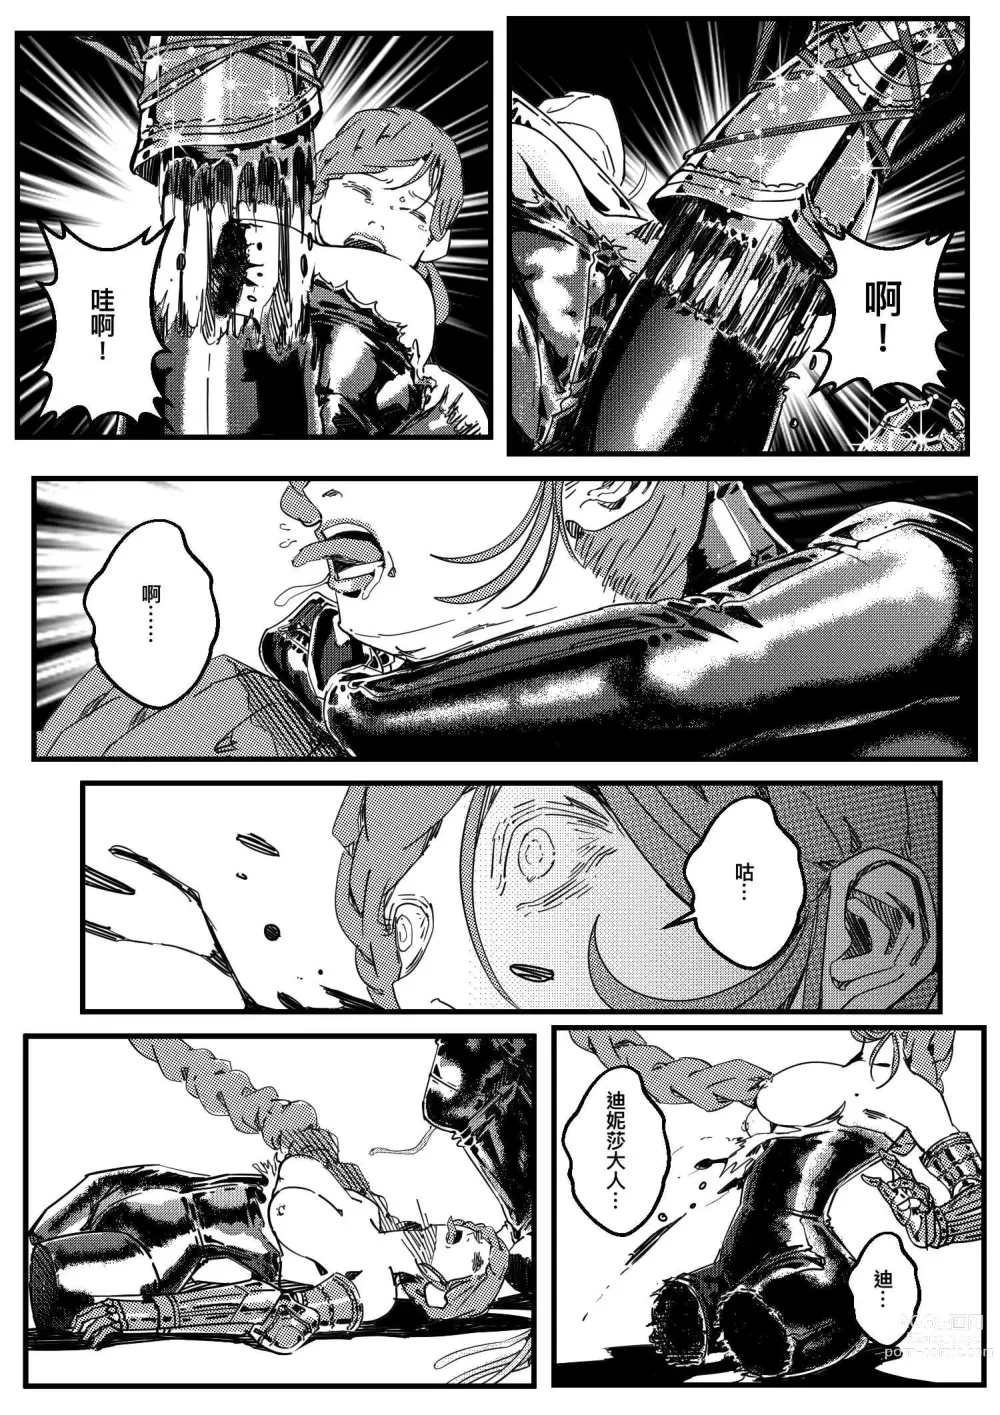 Page 529 of doujinshi 鉄處女/Ironmaiden 01-03（已腰斬）